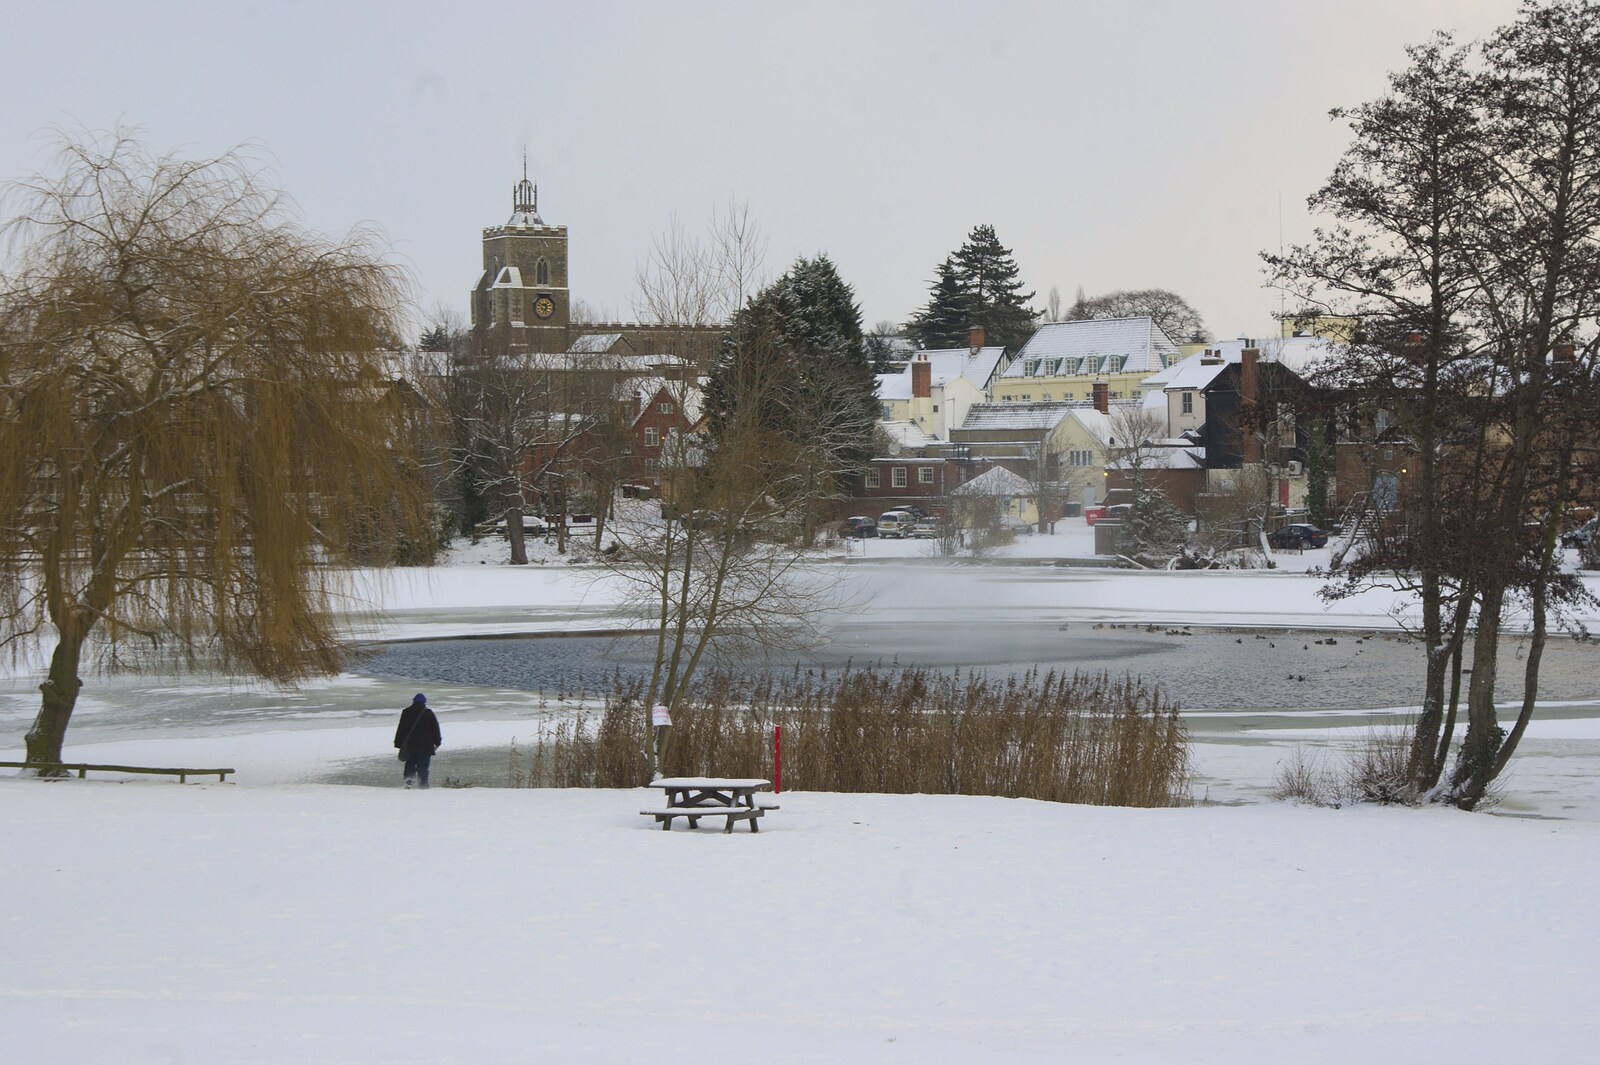 A Snowy Miscellany, Diss, Norfolk - 9th January 2010: Down by the Mere